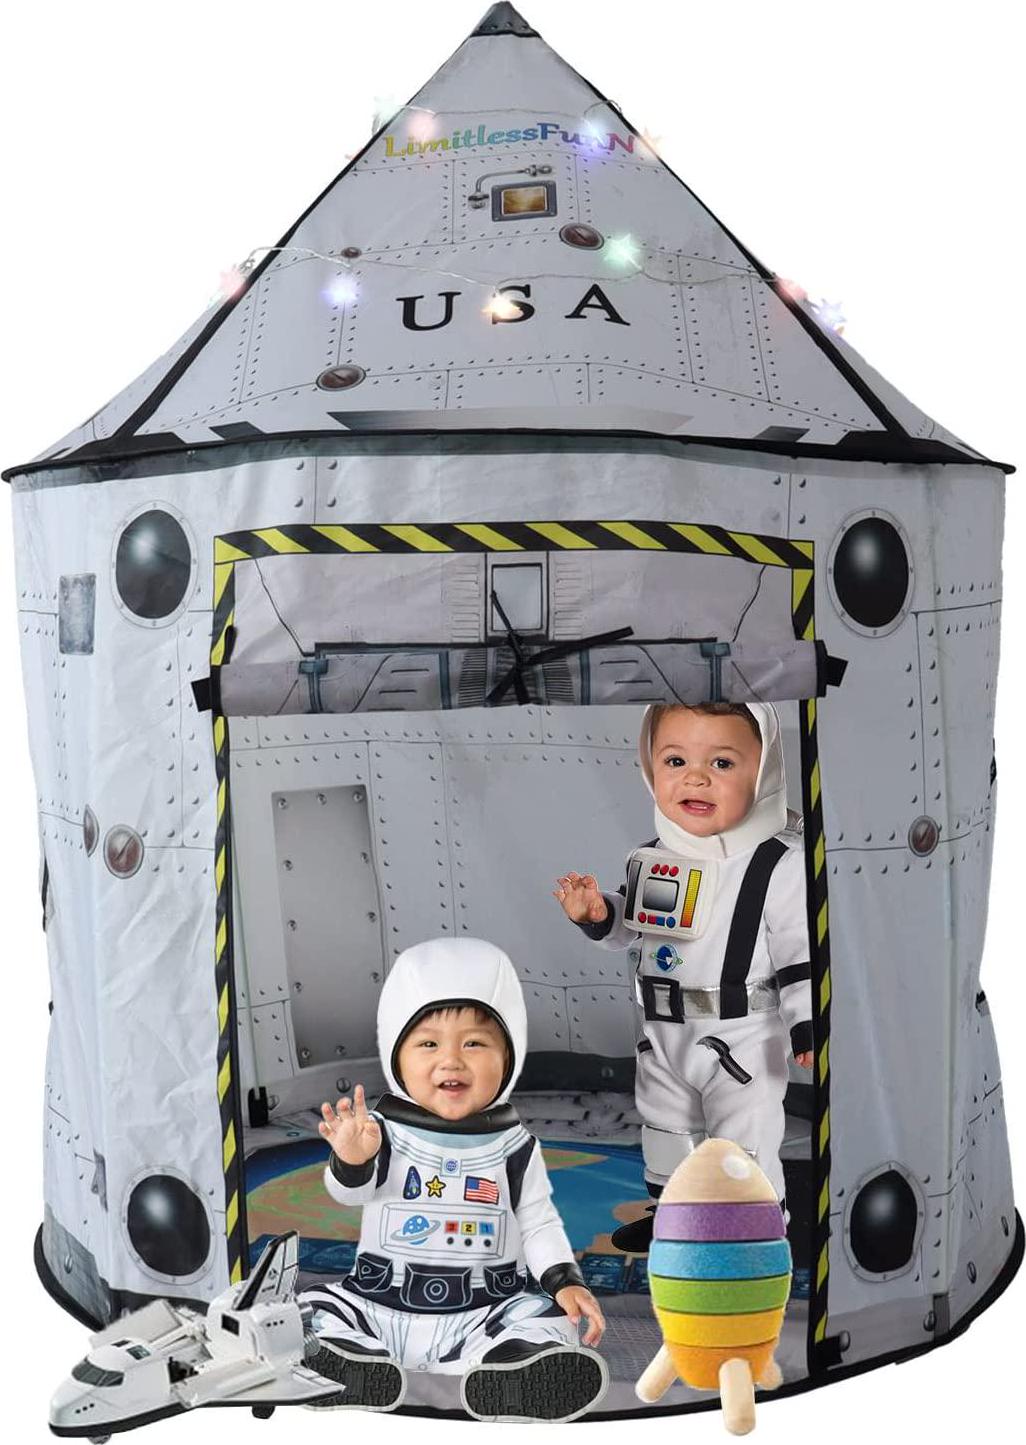 LimitlessFunN, LimitlessFunN Play Tent for Kids with Star Lights and Carrying Case [ Pop Up Portable Glow in The Dark ] Children Castle Playhouse for Boys and Girls , Indoor and Outdoor Use (White Rocket)